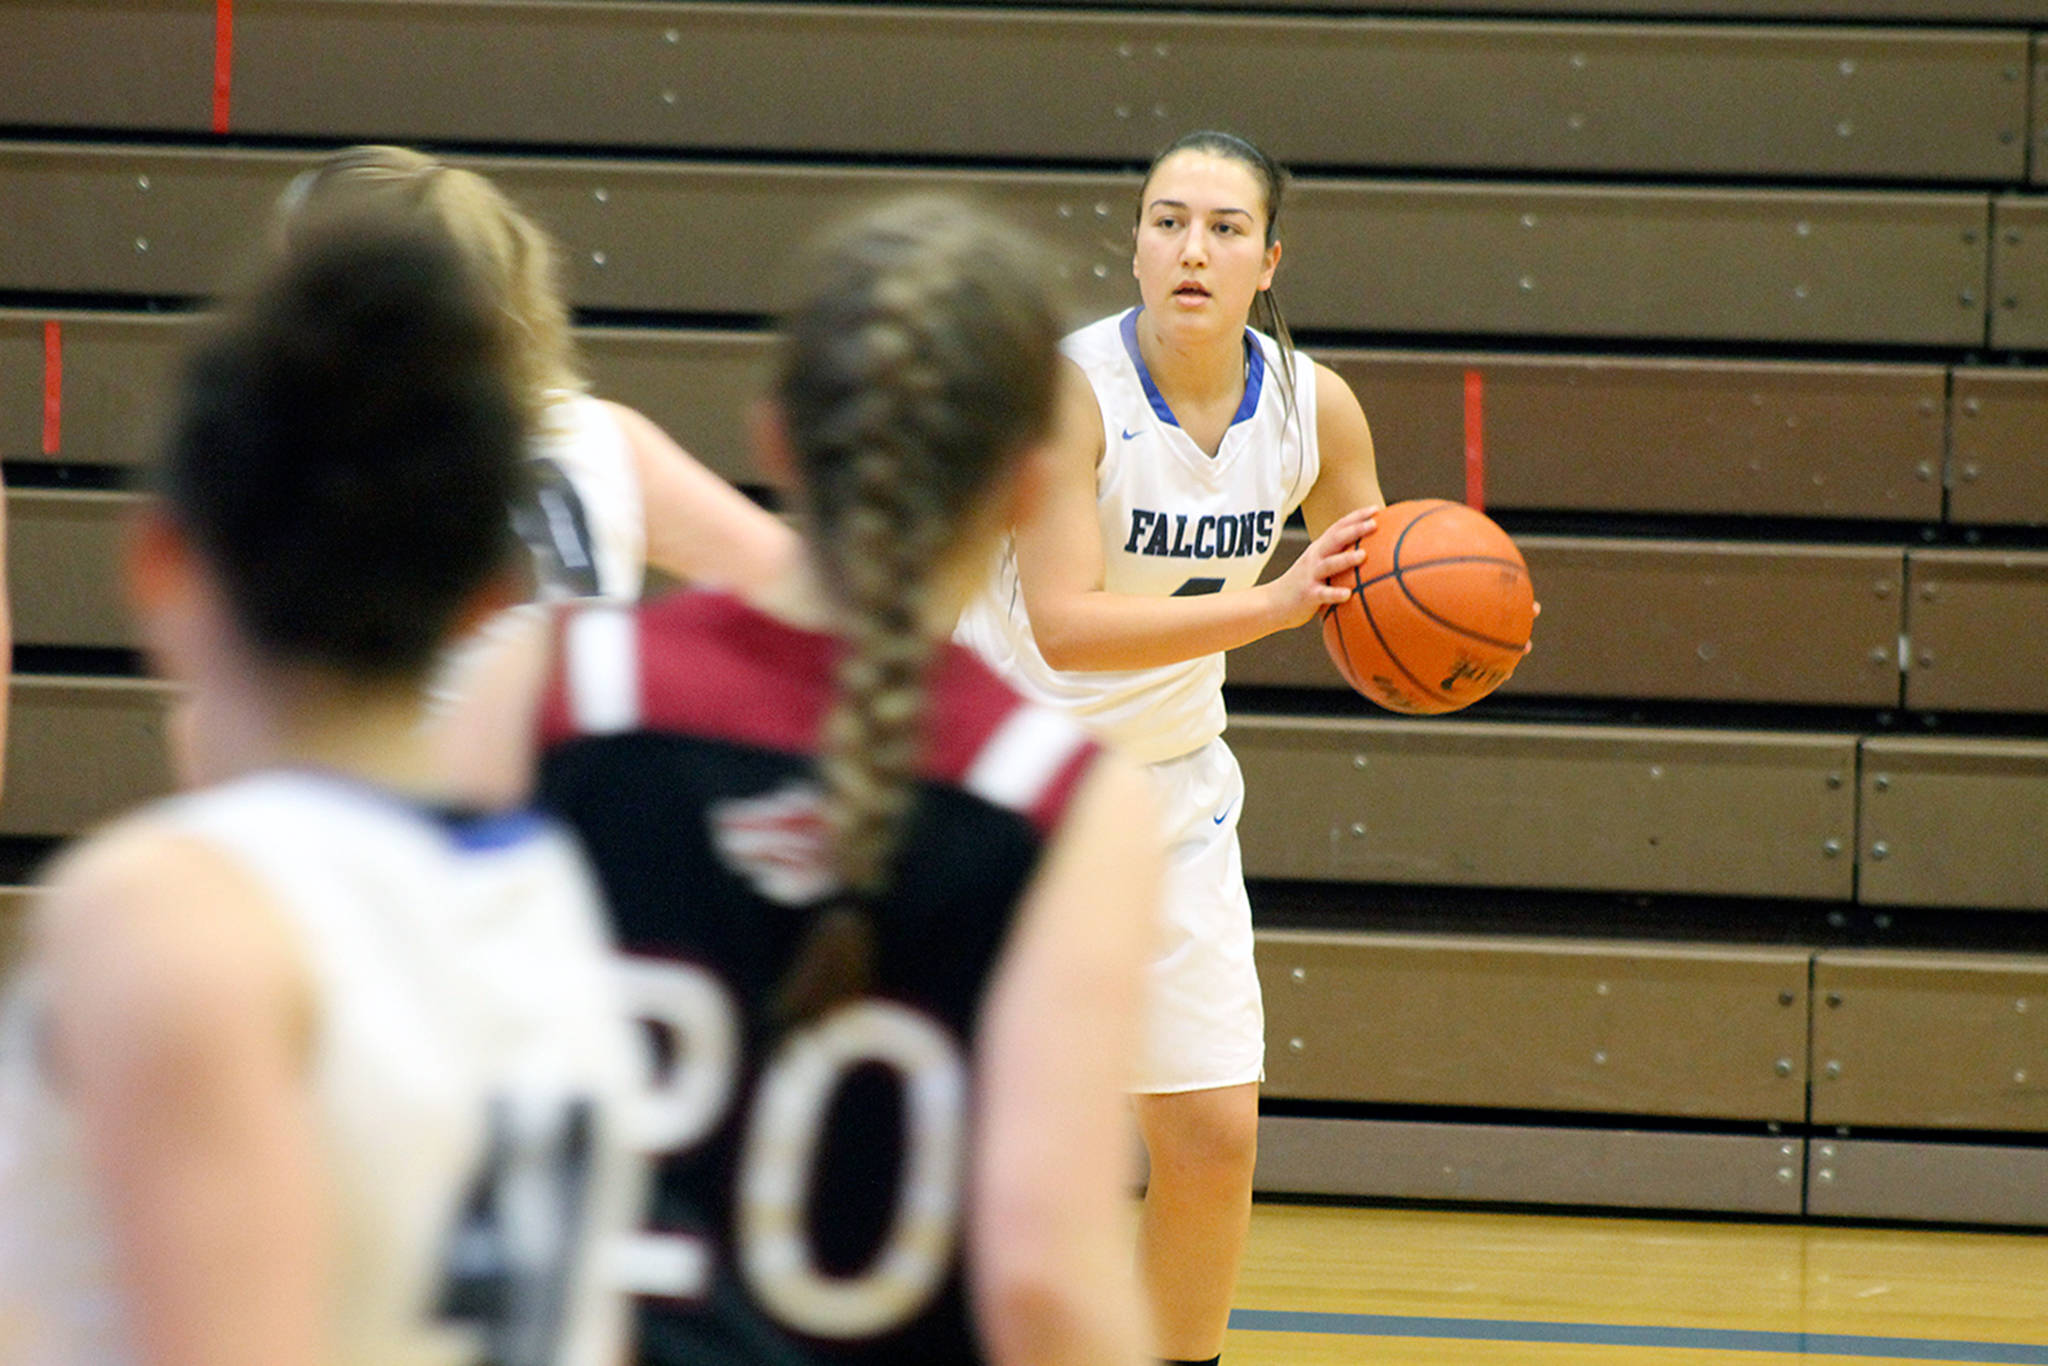 South Whidbey girls basketball team gives maximum effort